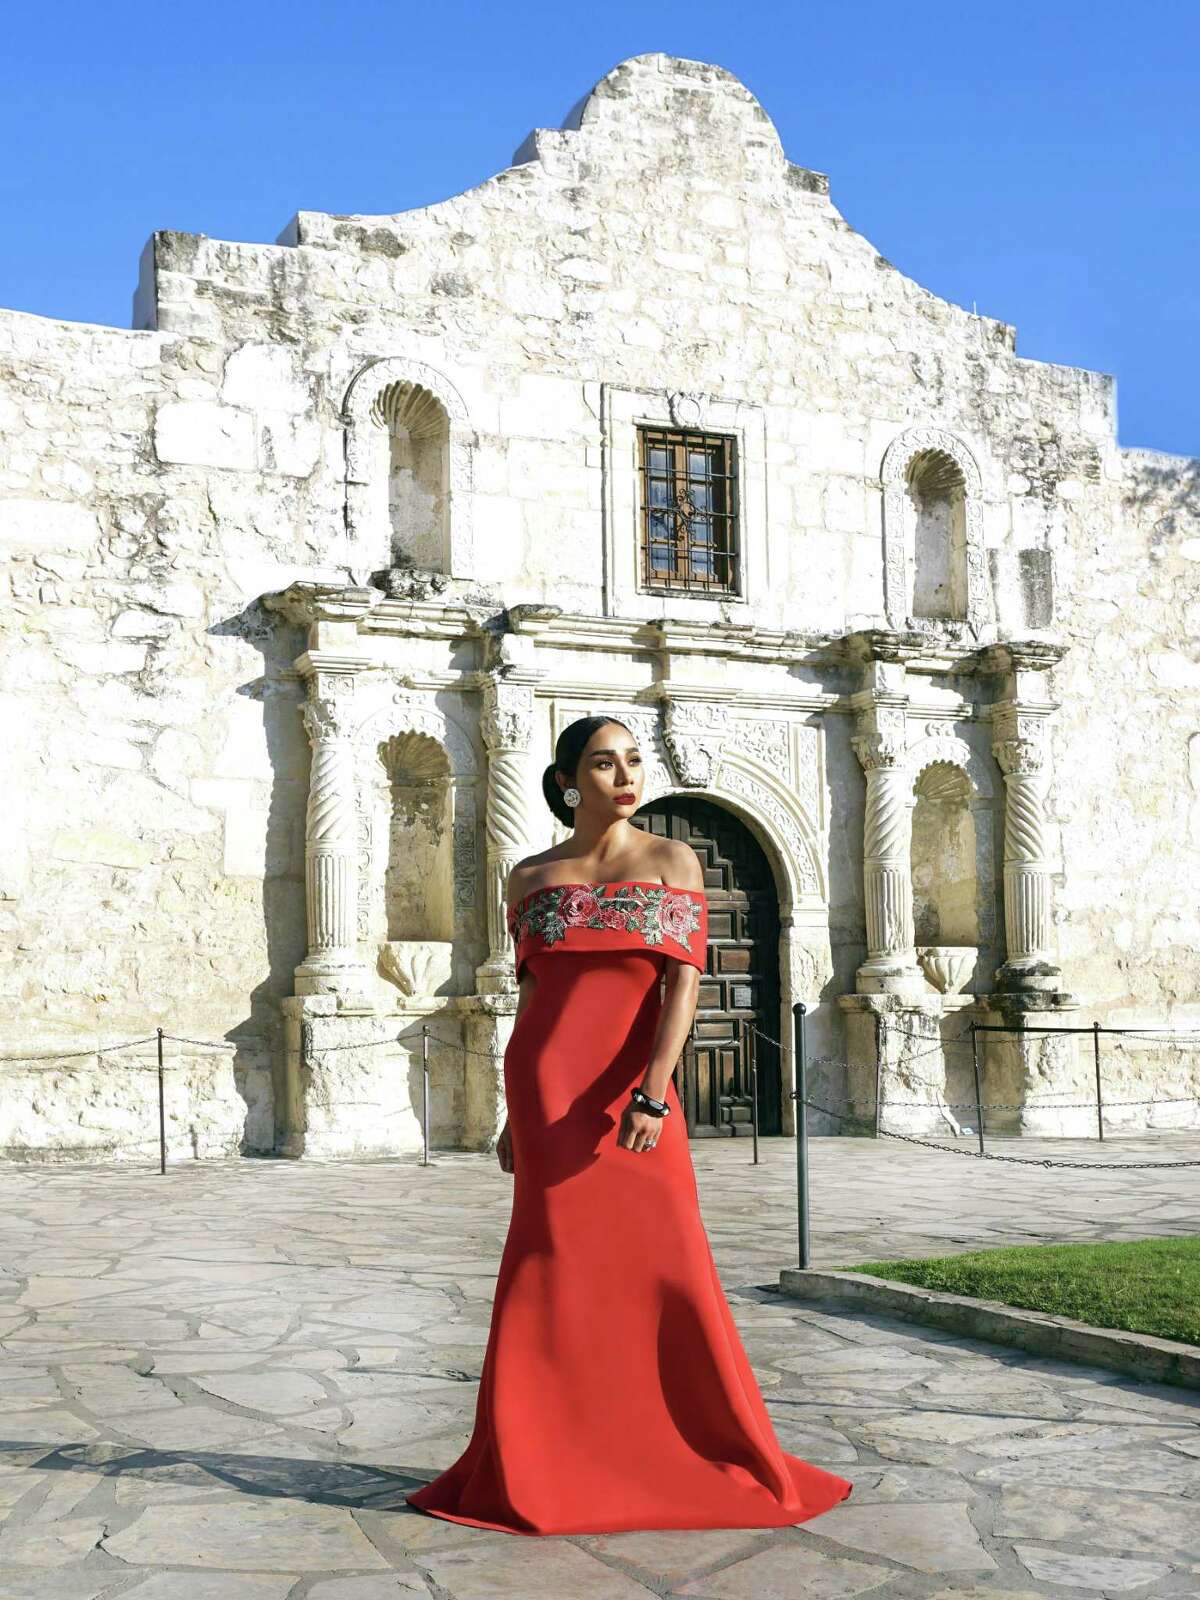 Shear Ann Brick focused on fashion blogging when she first moved to San Antonio less than two years ago. Her first San Antonio photo shoot was at the Alamo.